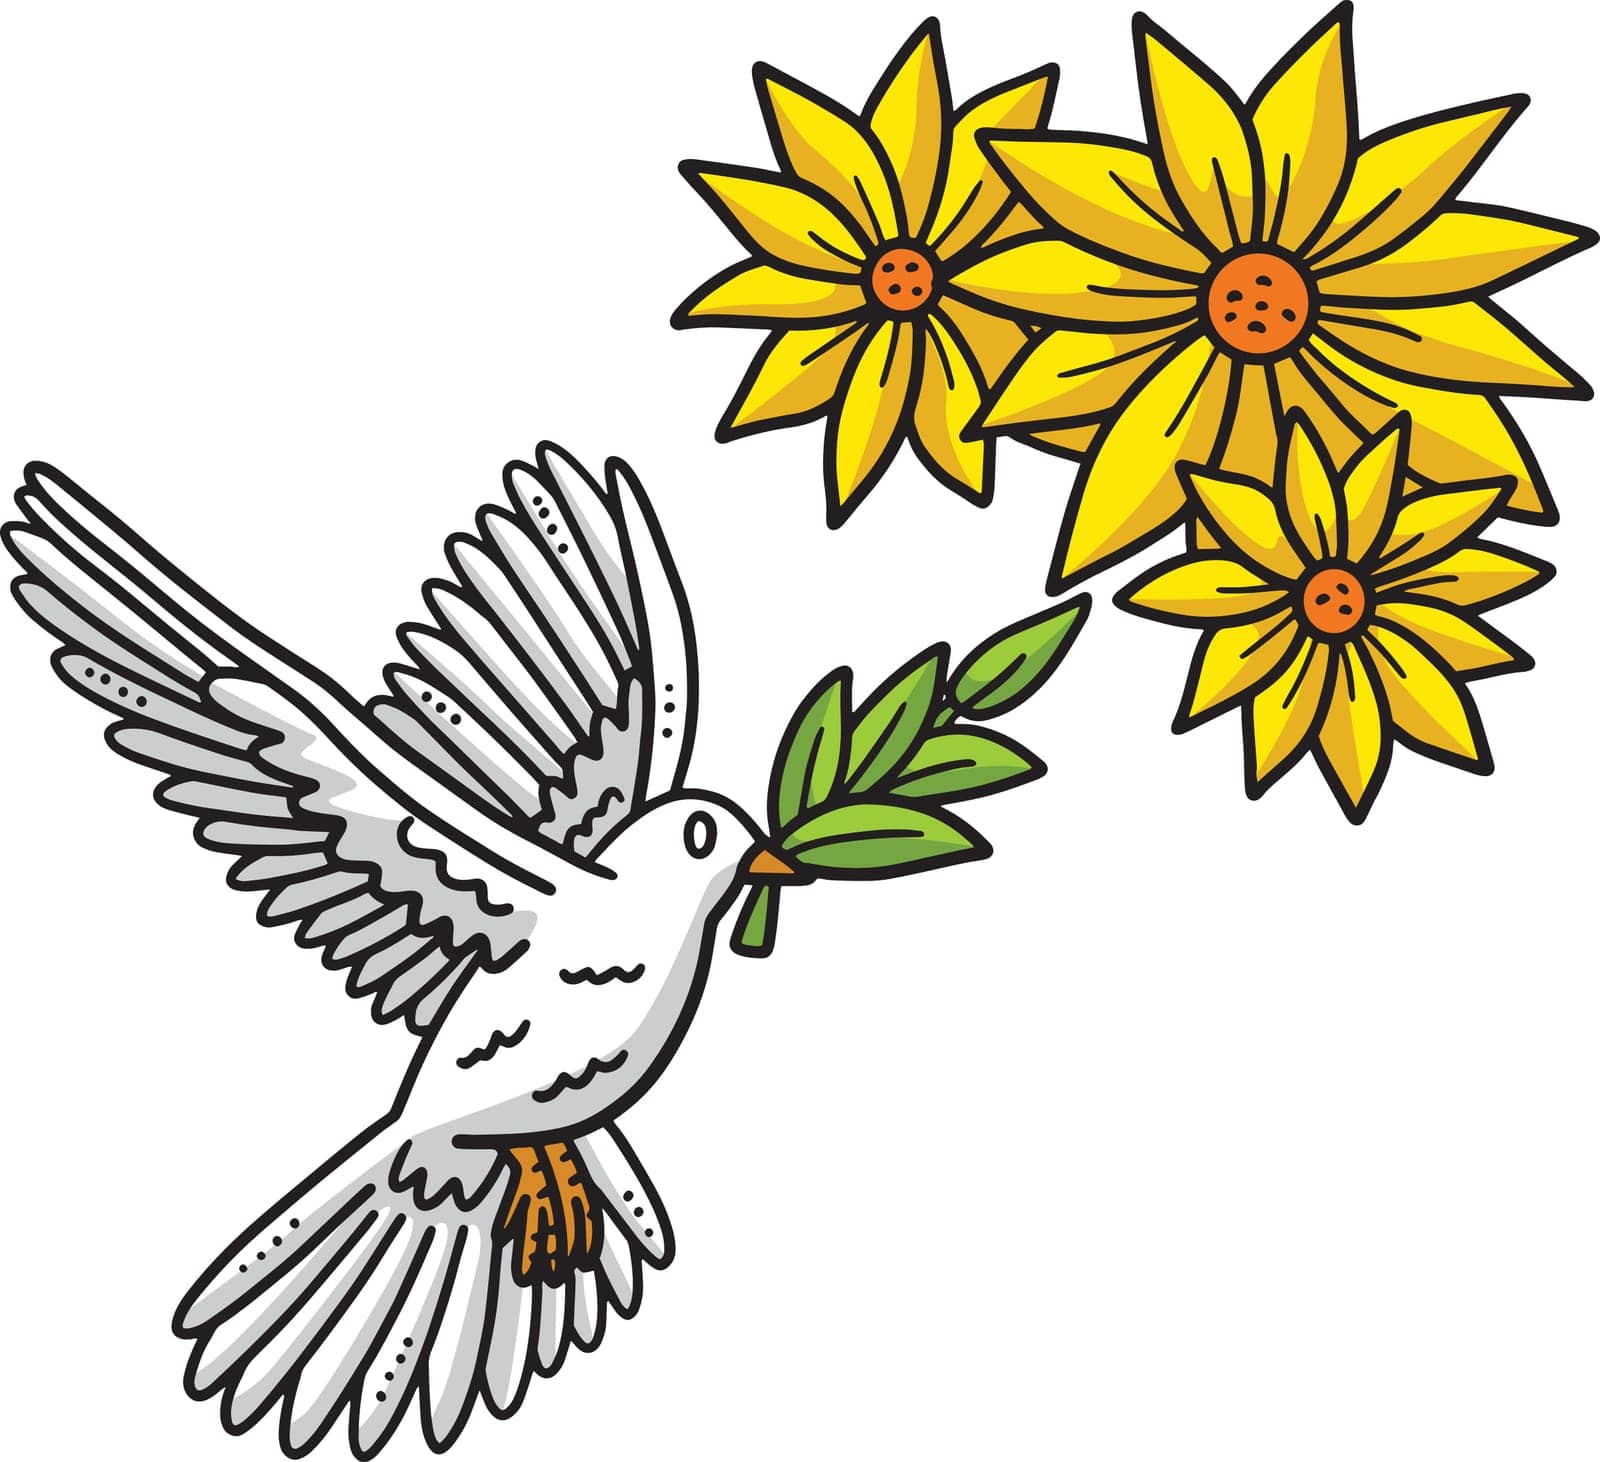 Bird and Flower Cartoon Colored Clipart by abbydesign